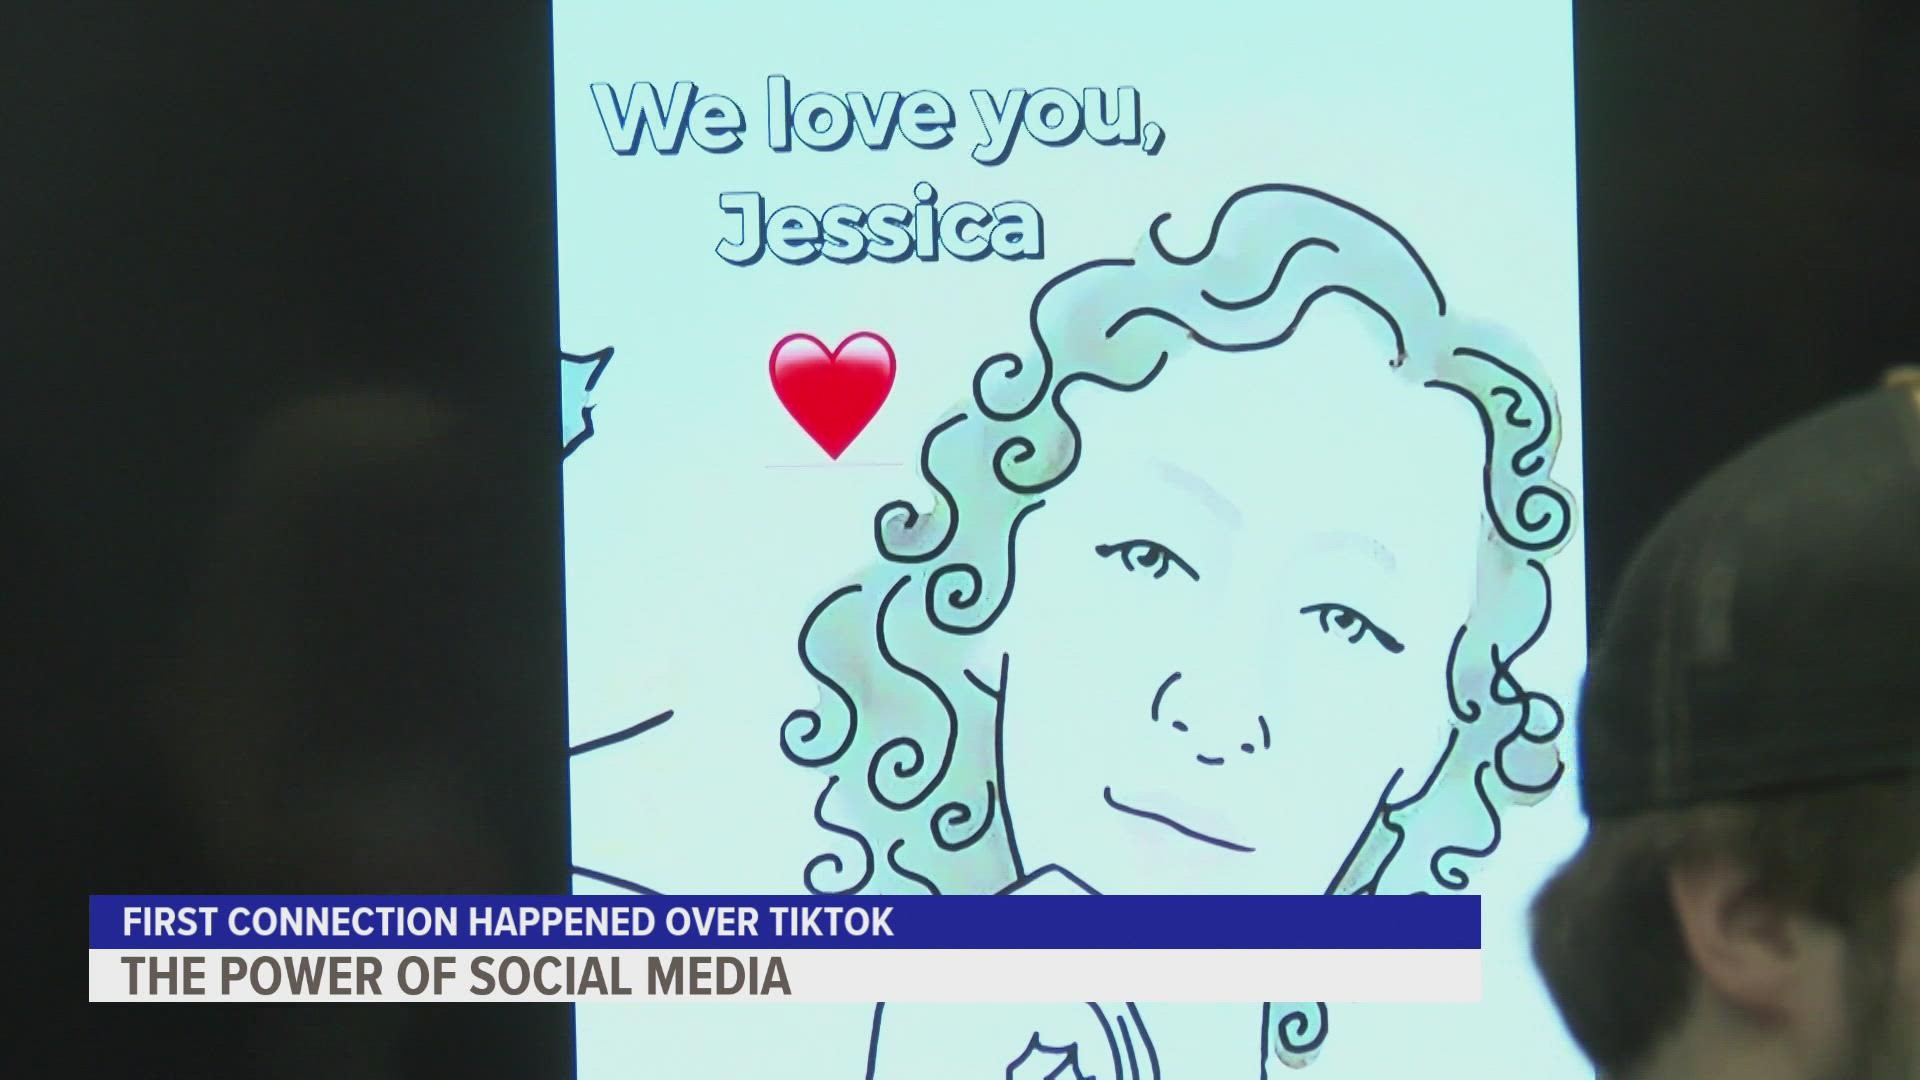 Jessica Hiatt has shared her battle with cancer with over 500,000 followers